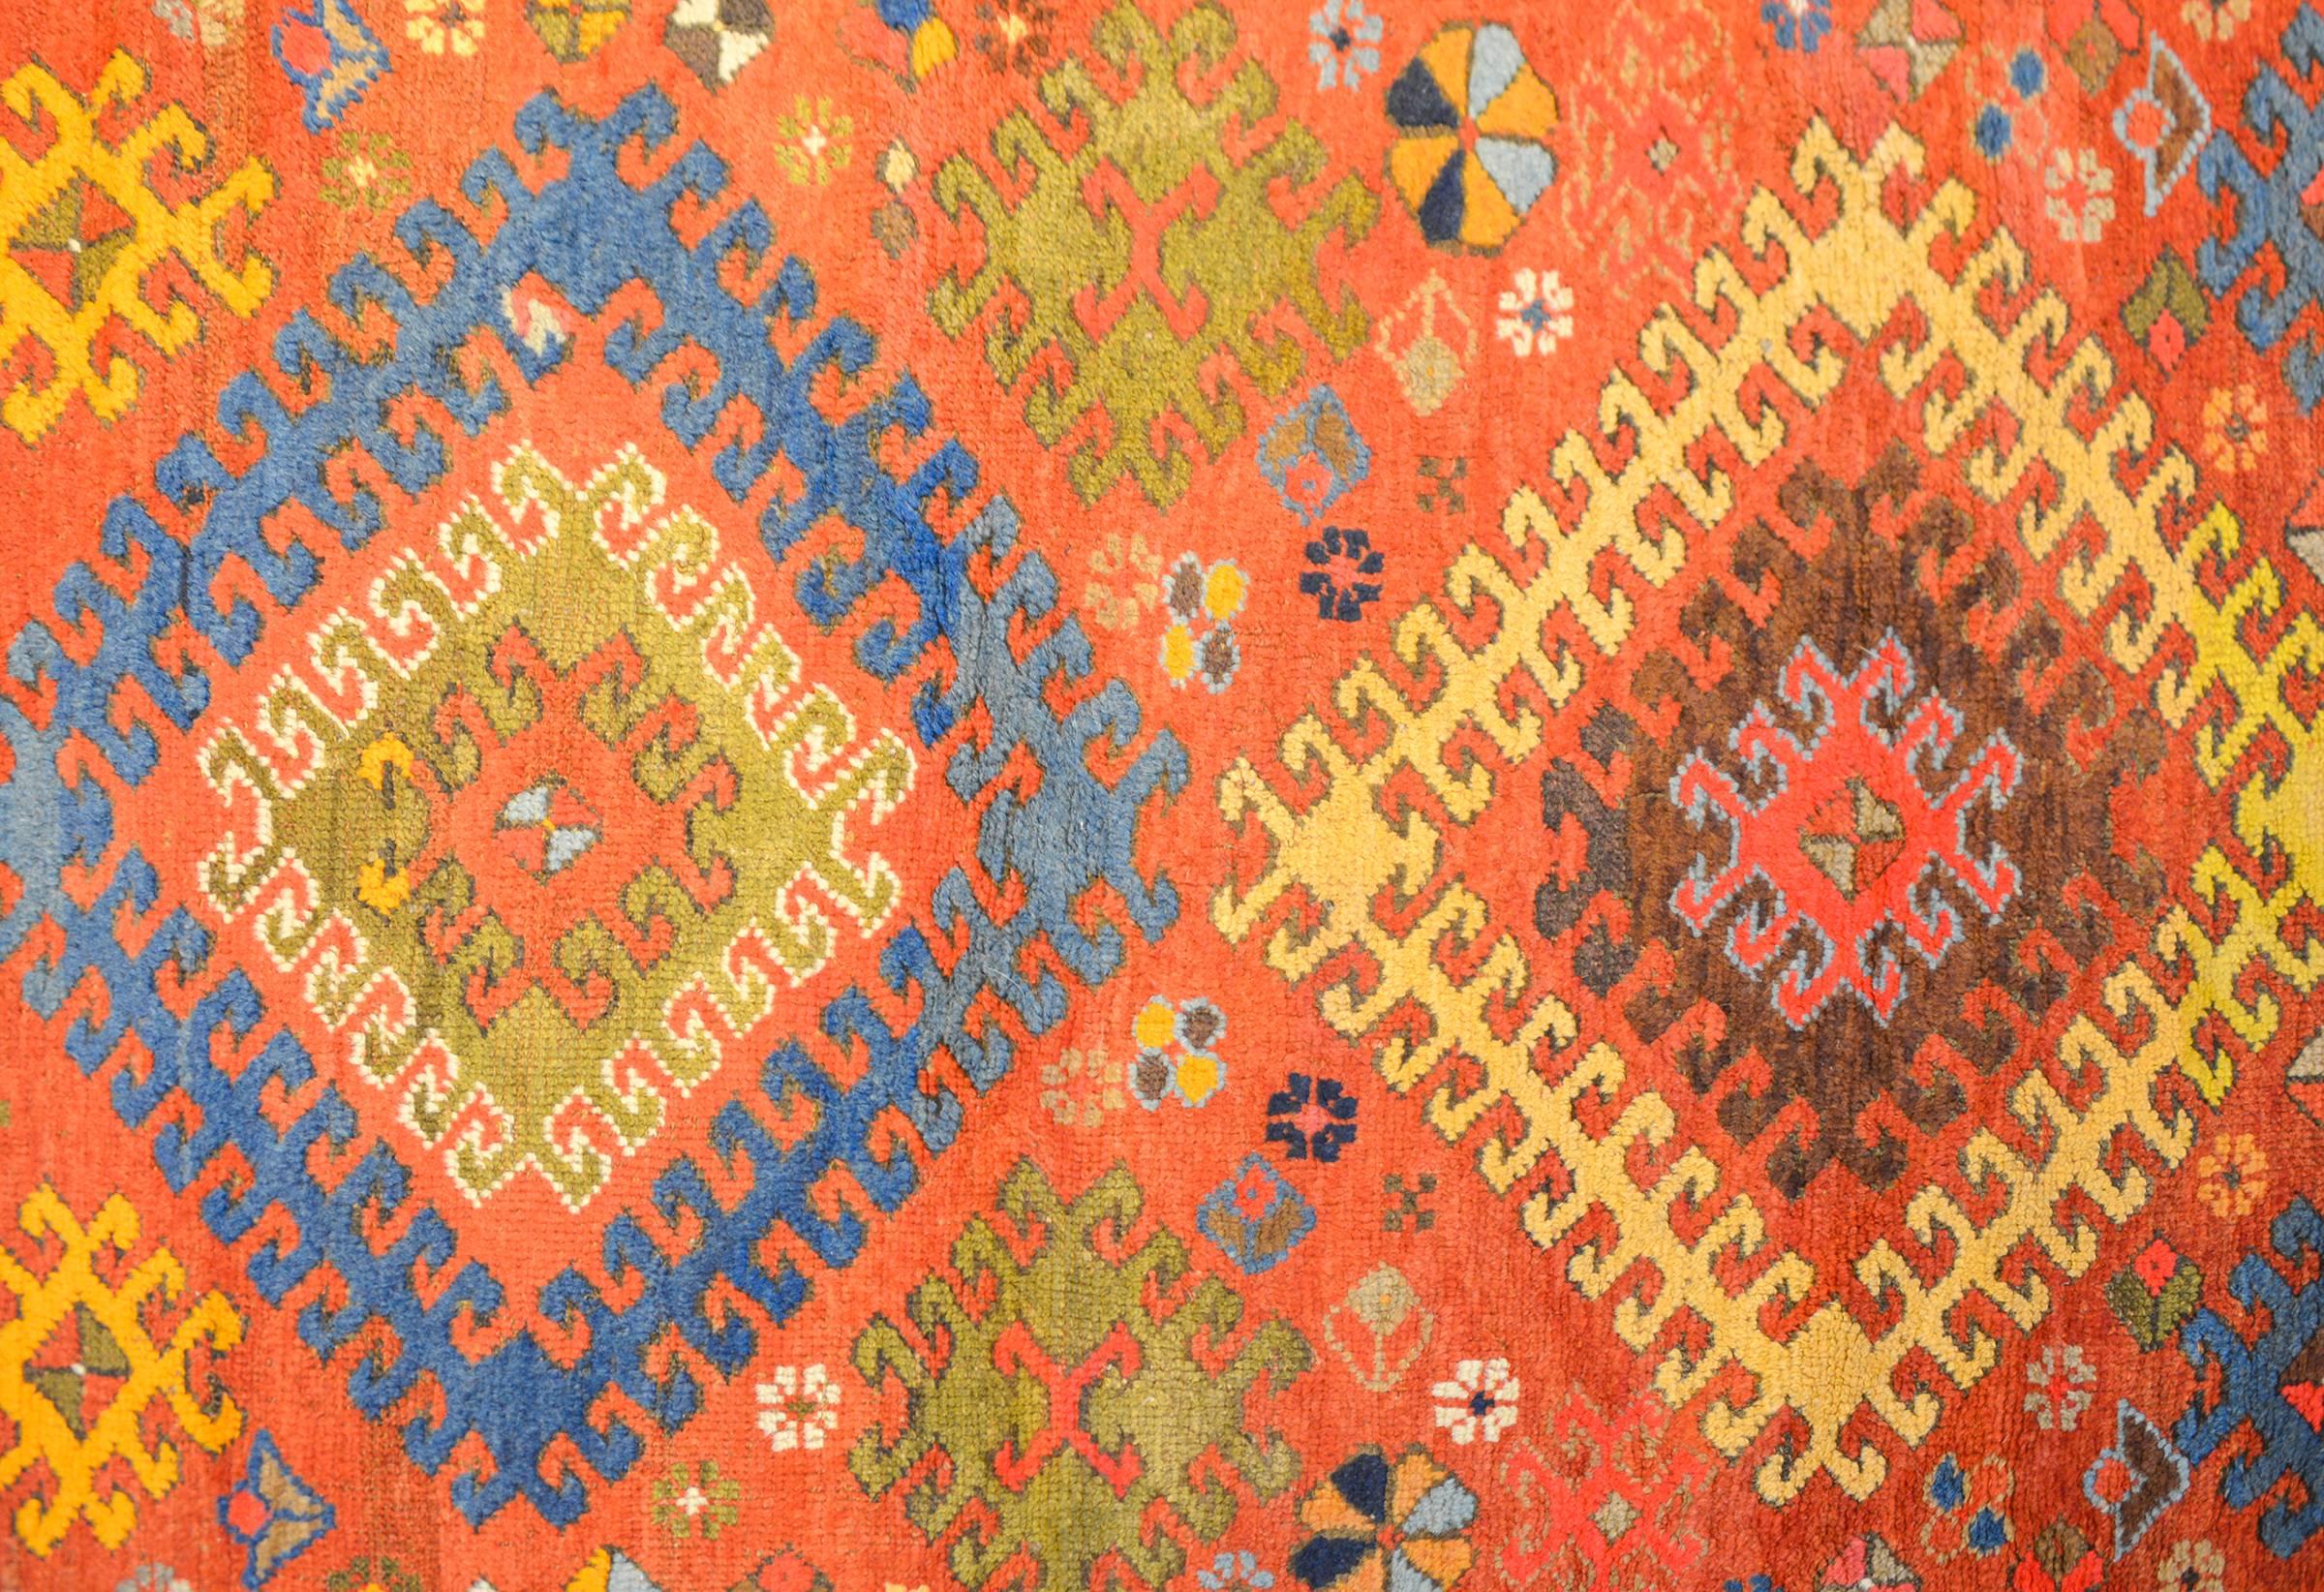 An unbelievable early 20th century Persian Kazak rug with two large geometric medallions, one yellow and one blue, with multiple 